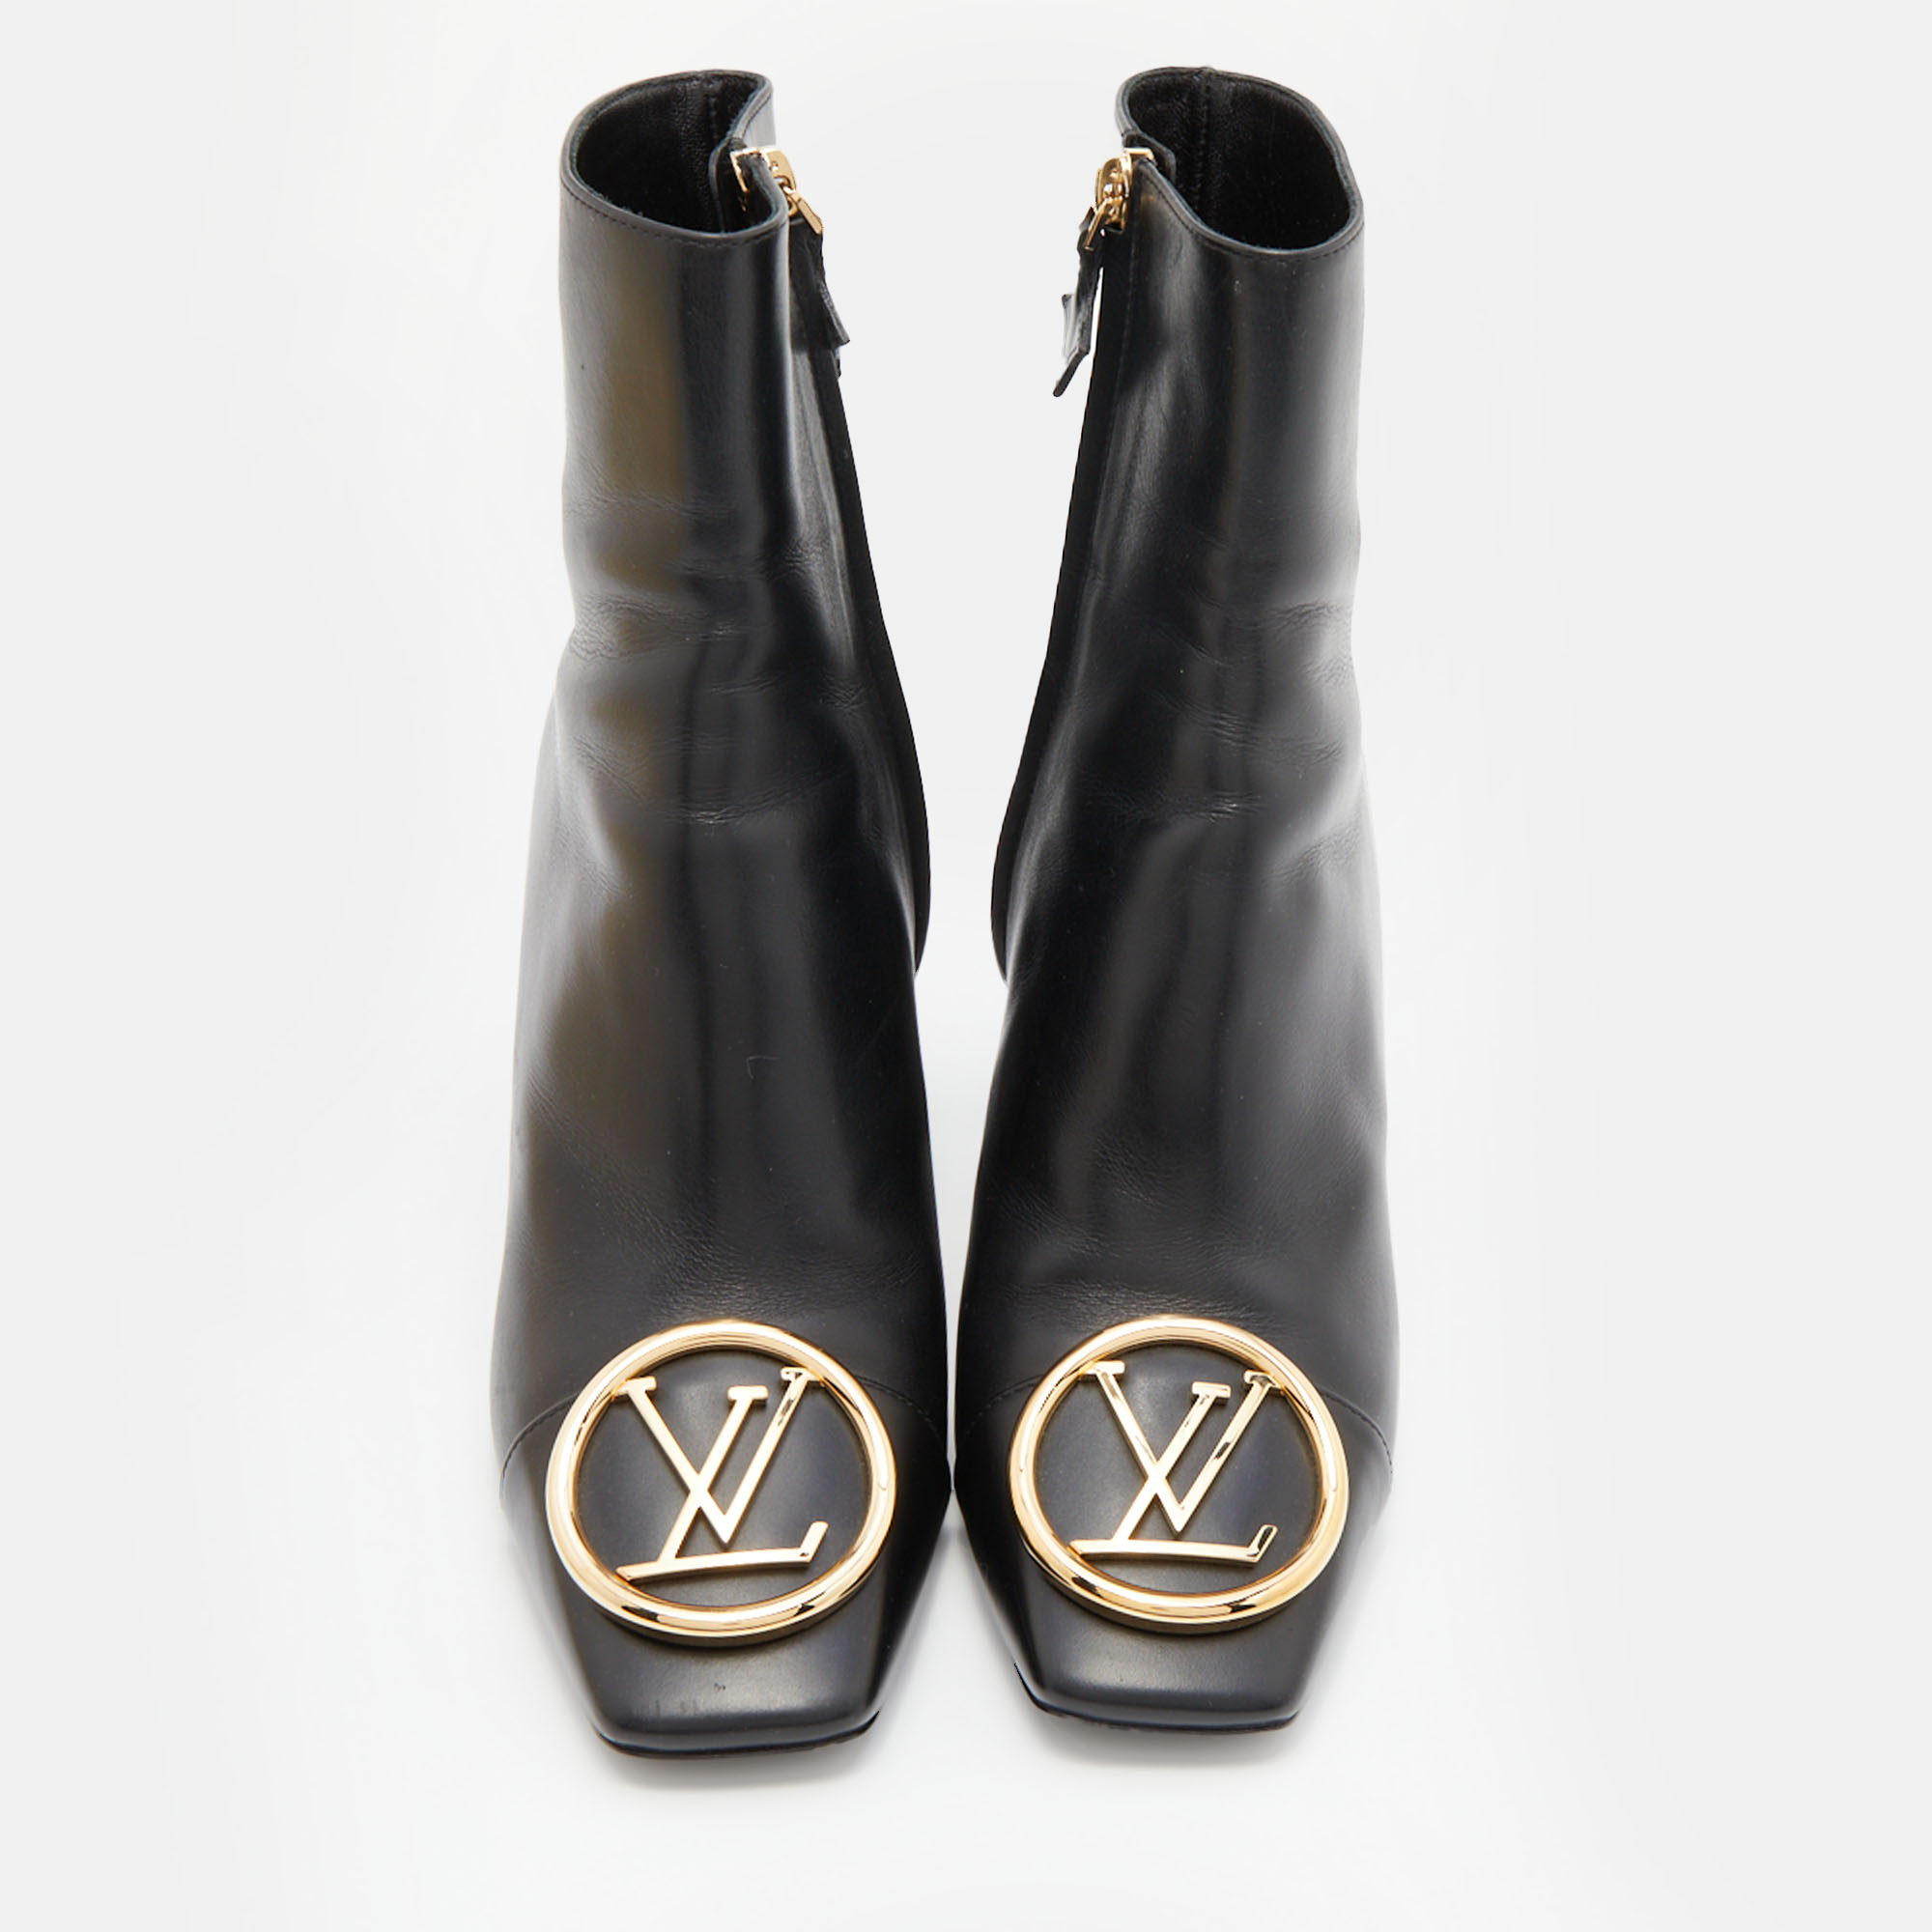 Louis Vuitton madeleine Black Leather Ankle Boots New